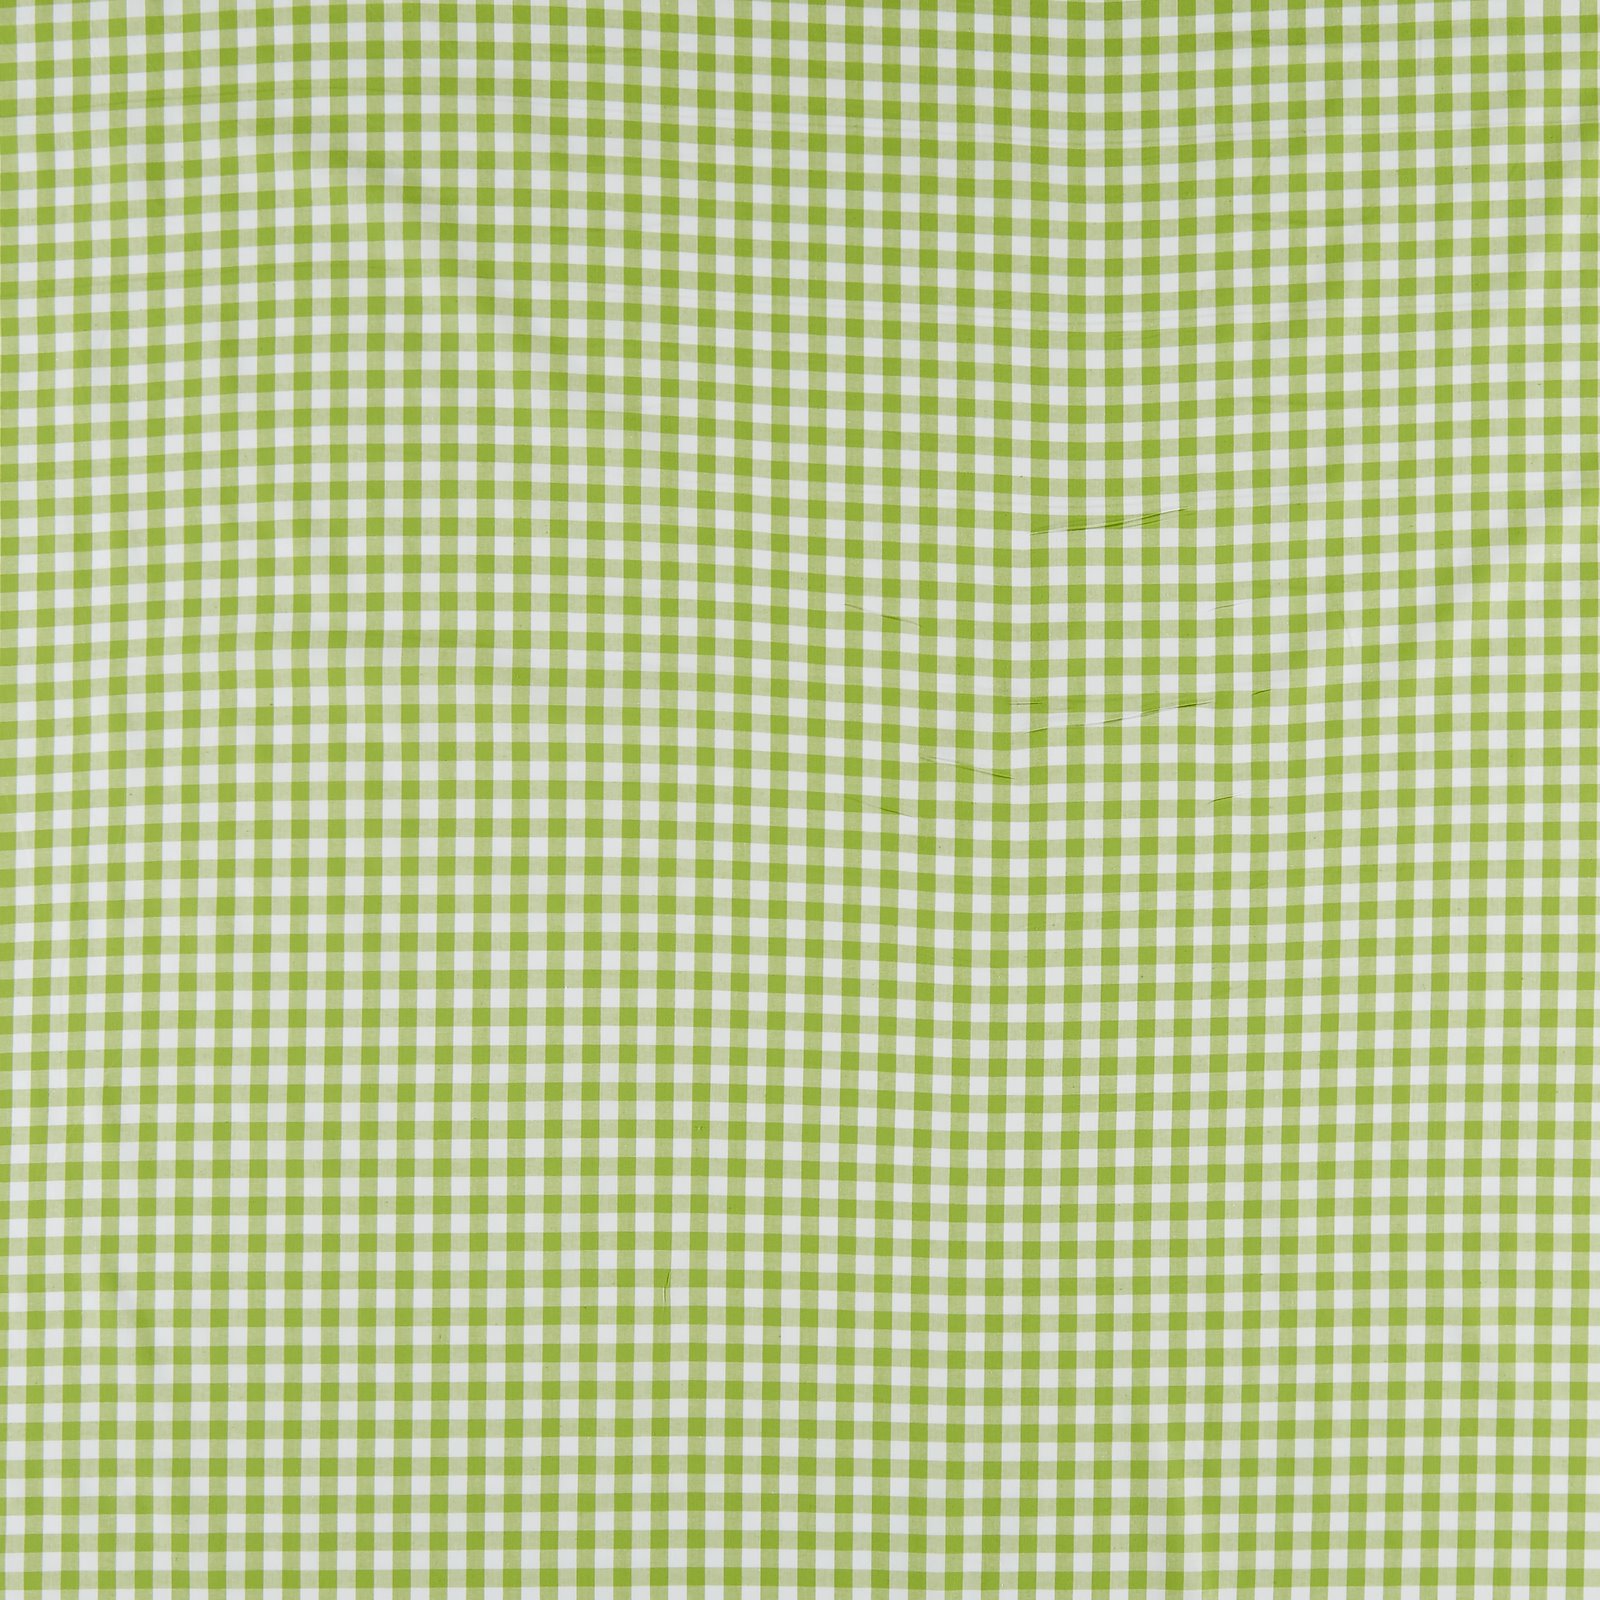 Cotton yarn dyed lime/white check 780900_pack_sp